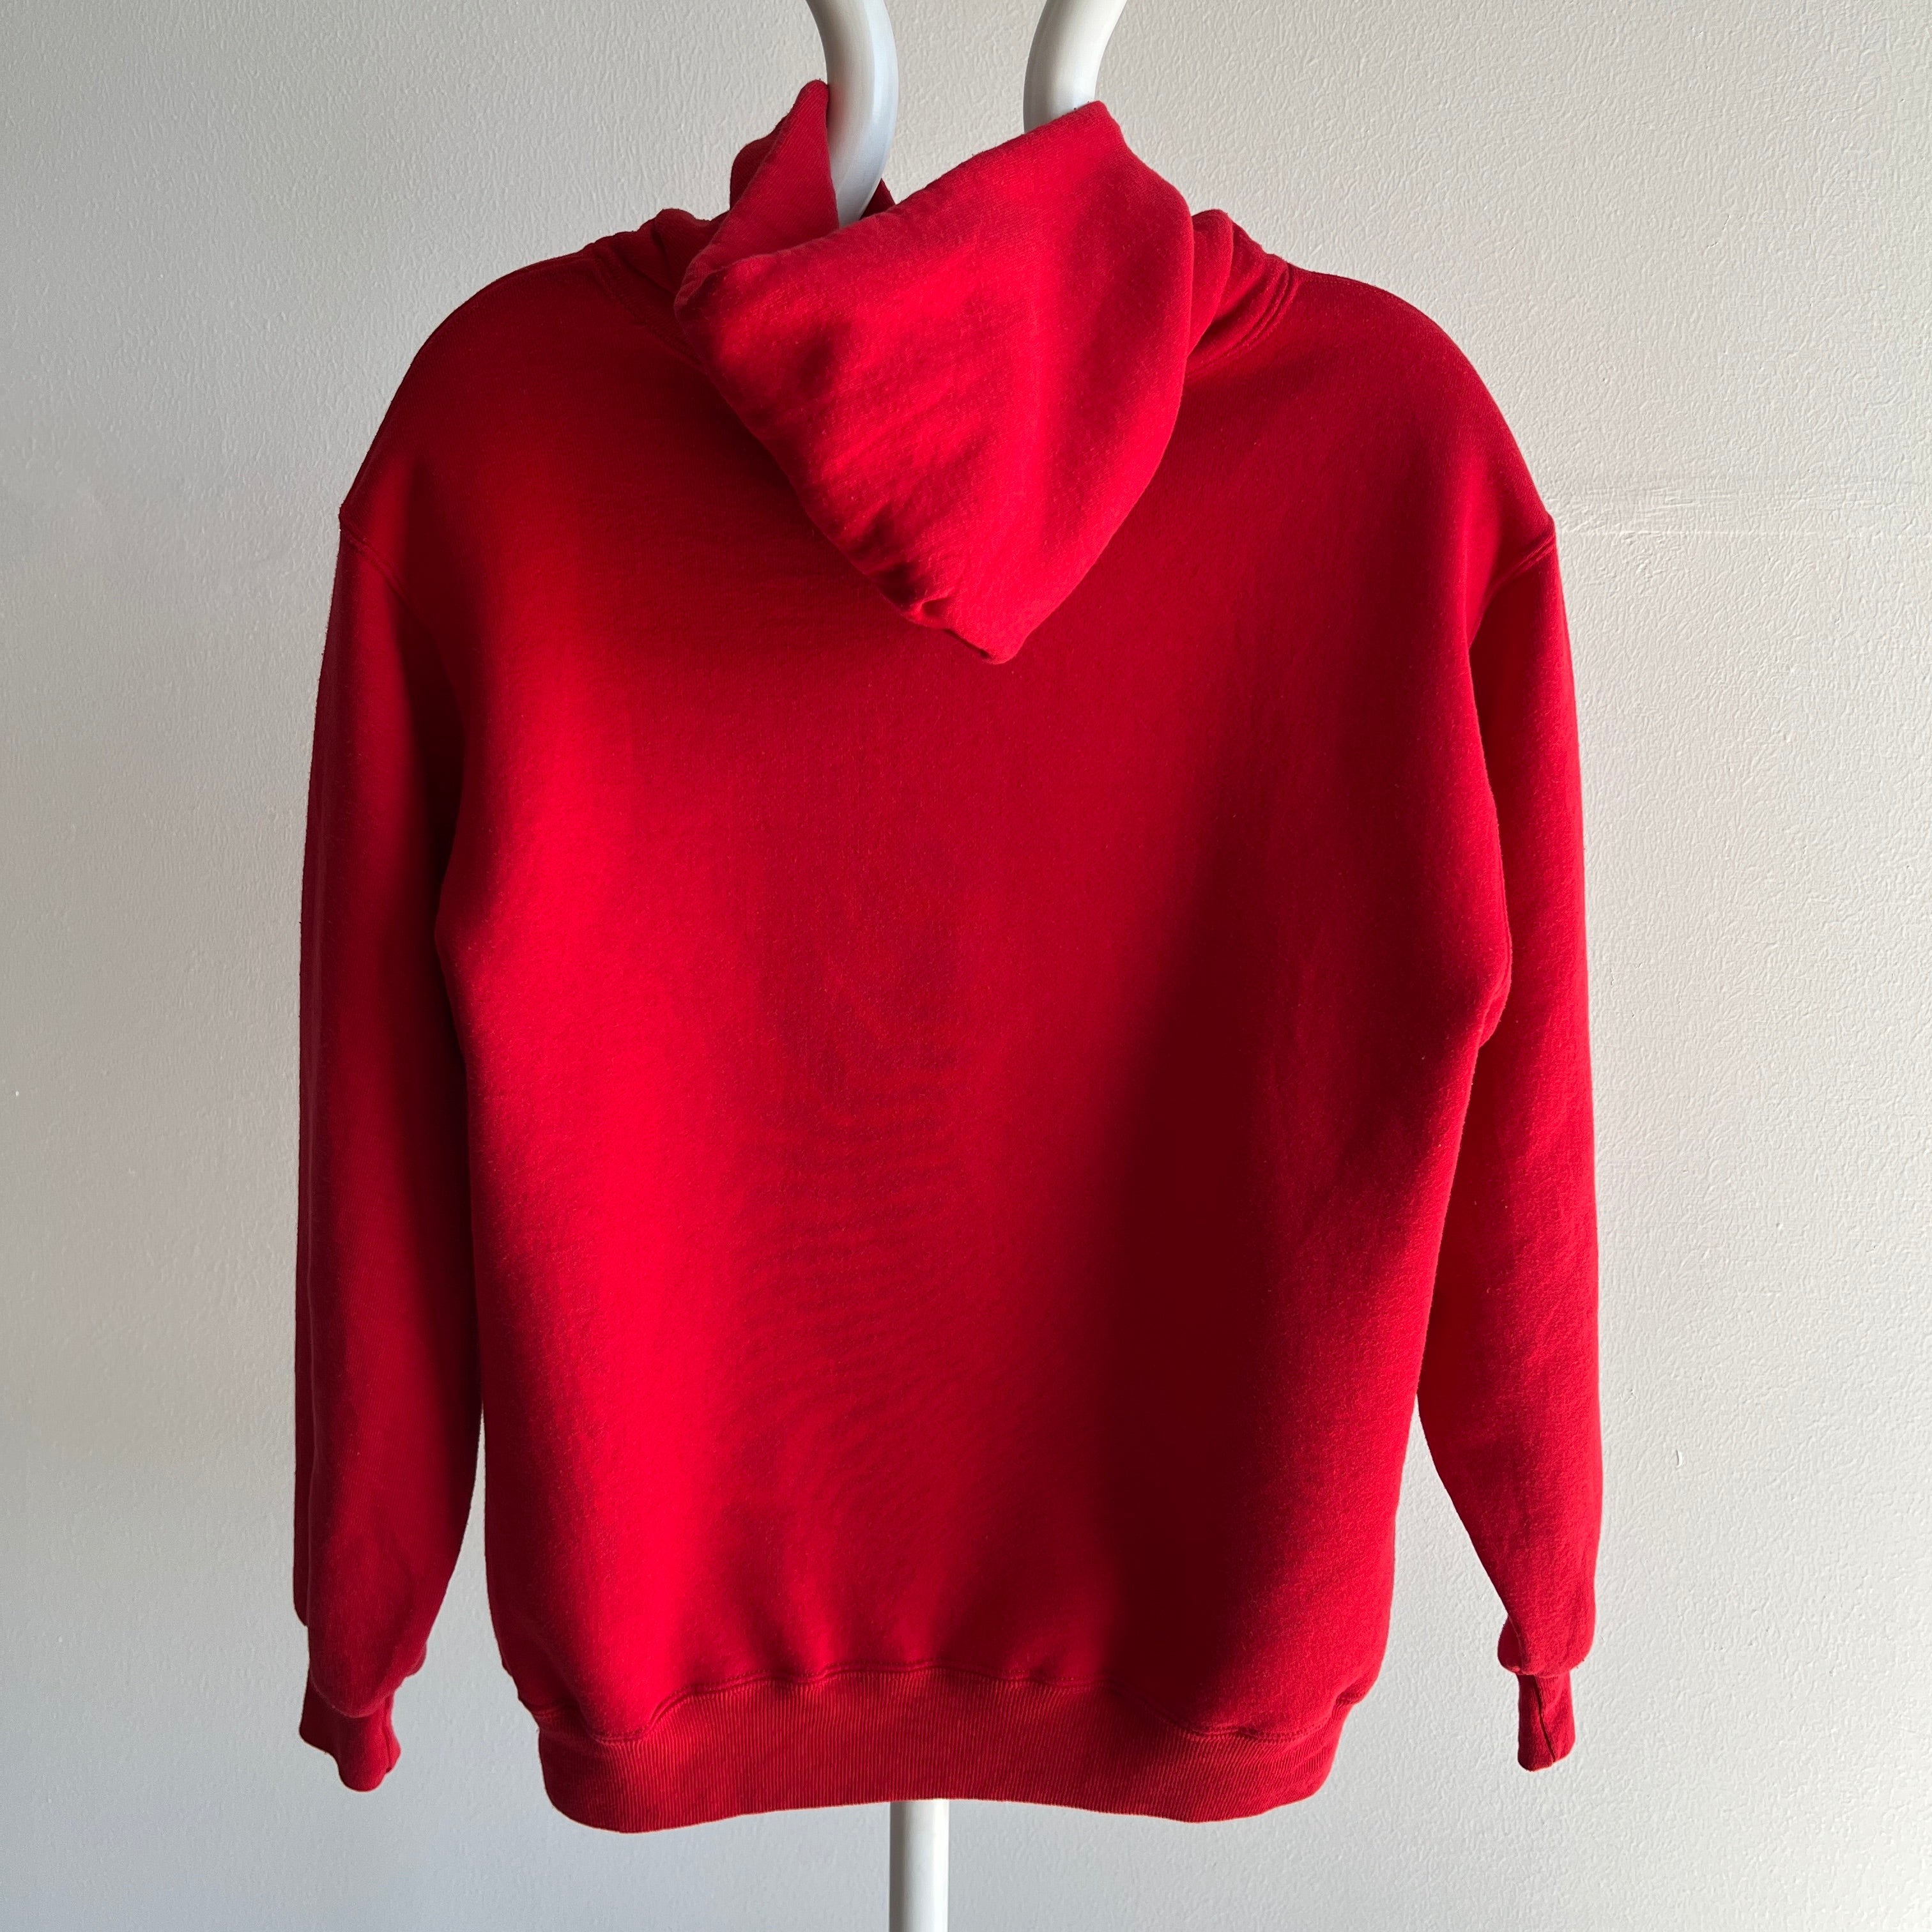 1980s Cardinal Red Pullover Hoodie by Jerzees